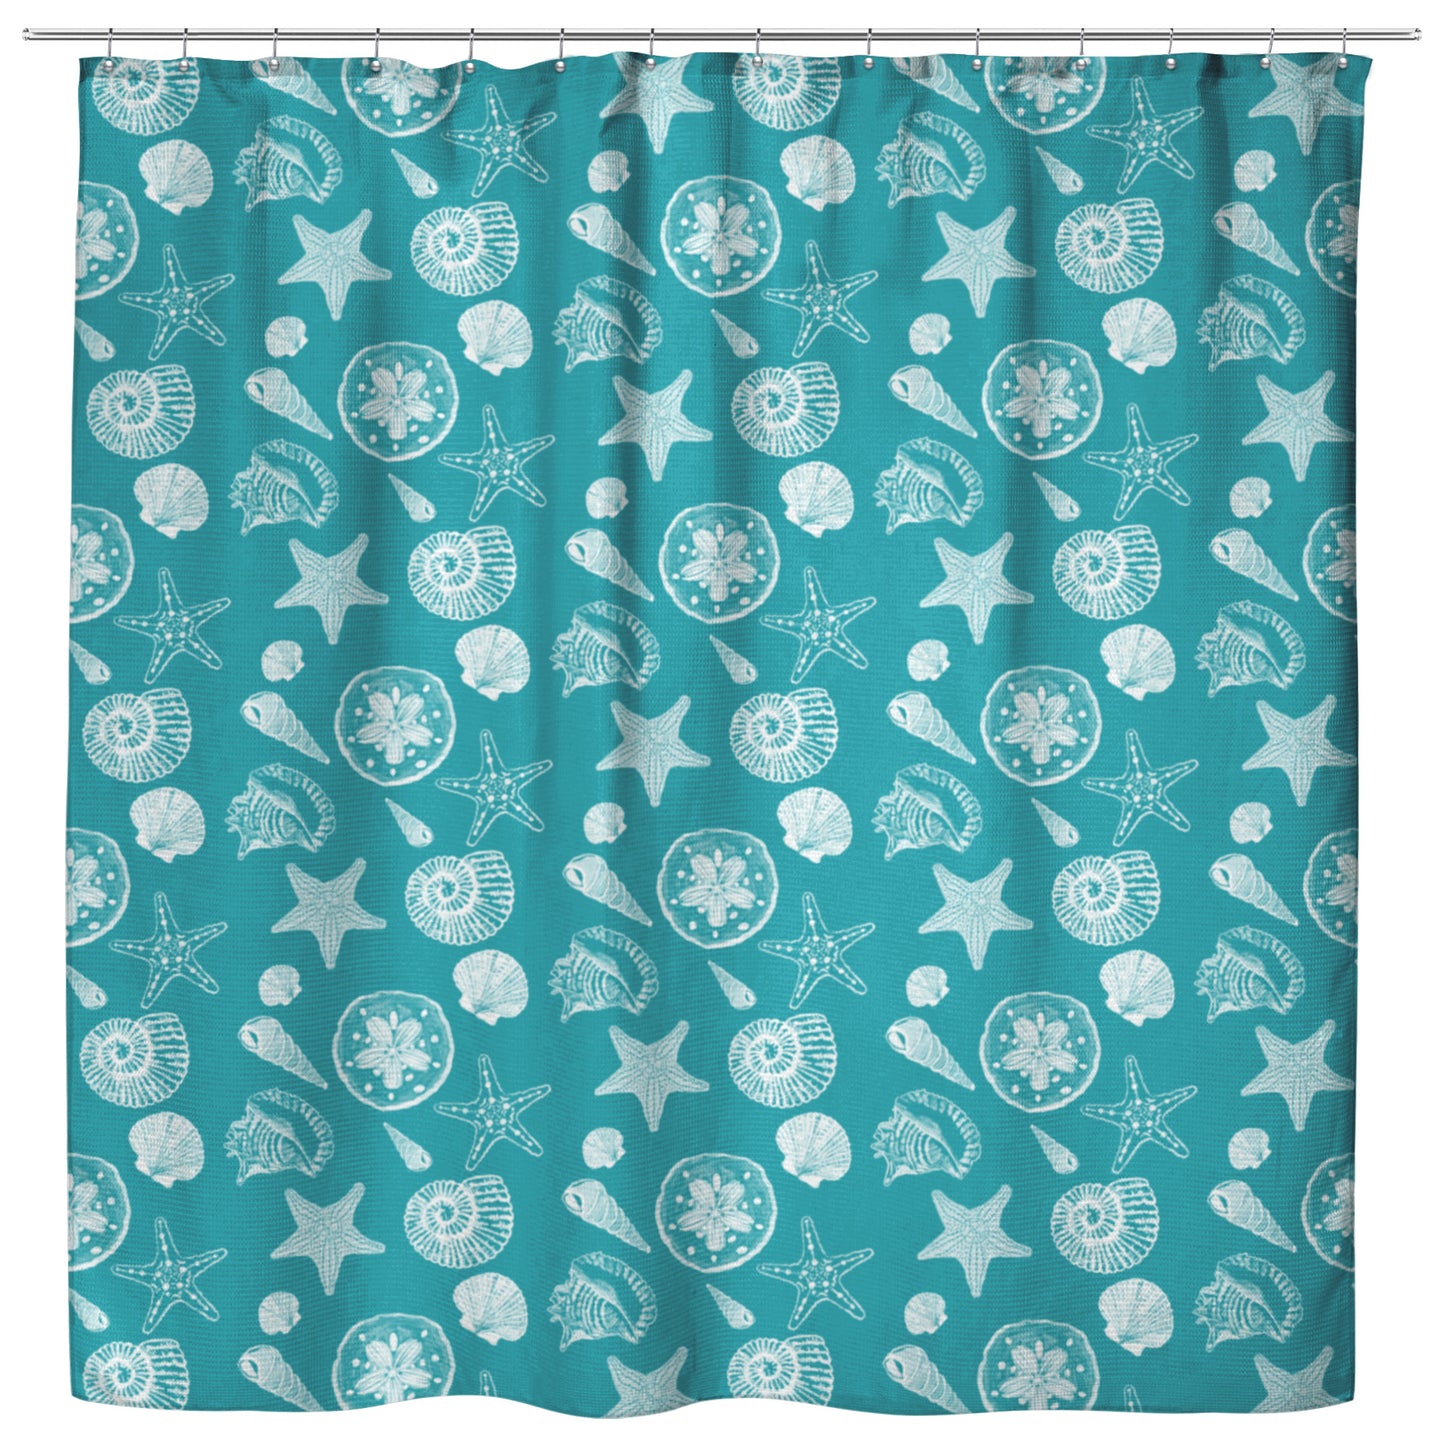 Seashell Sketches on Teal Background, Shower Curtain